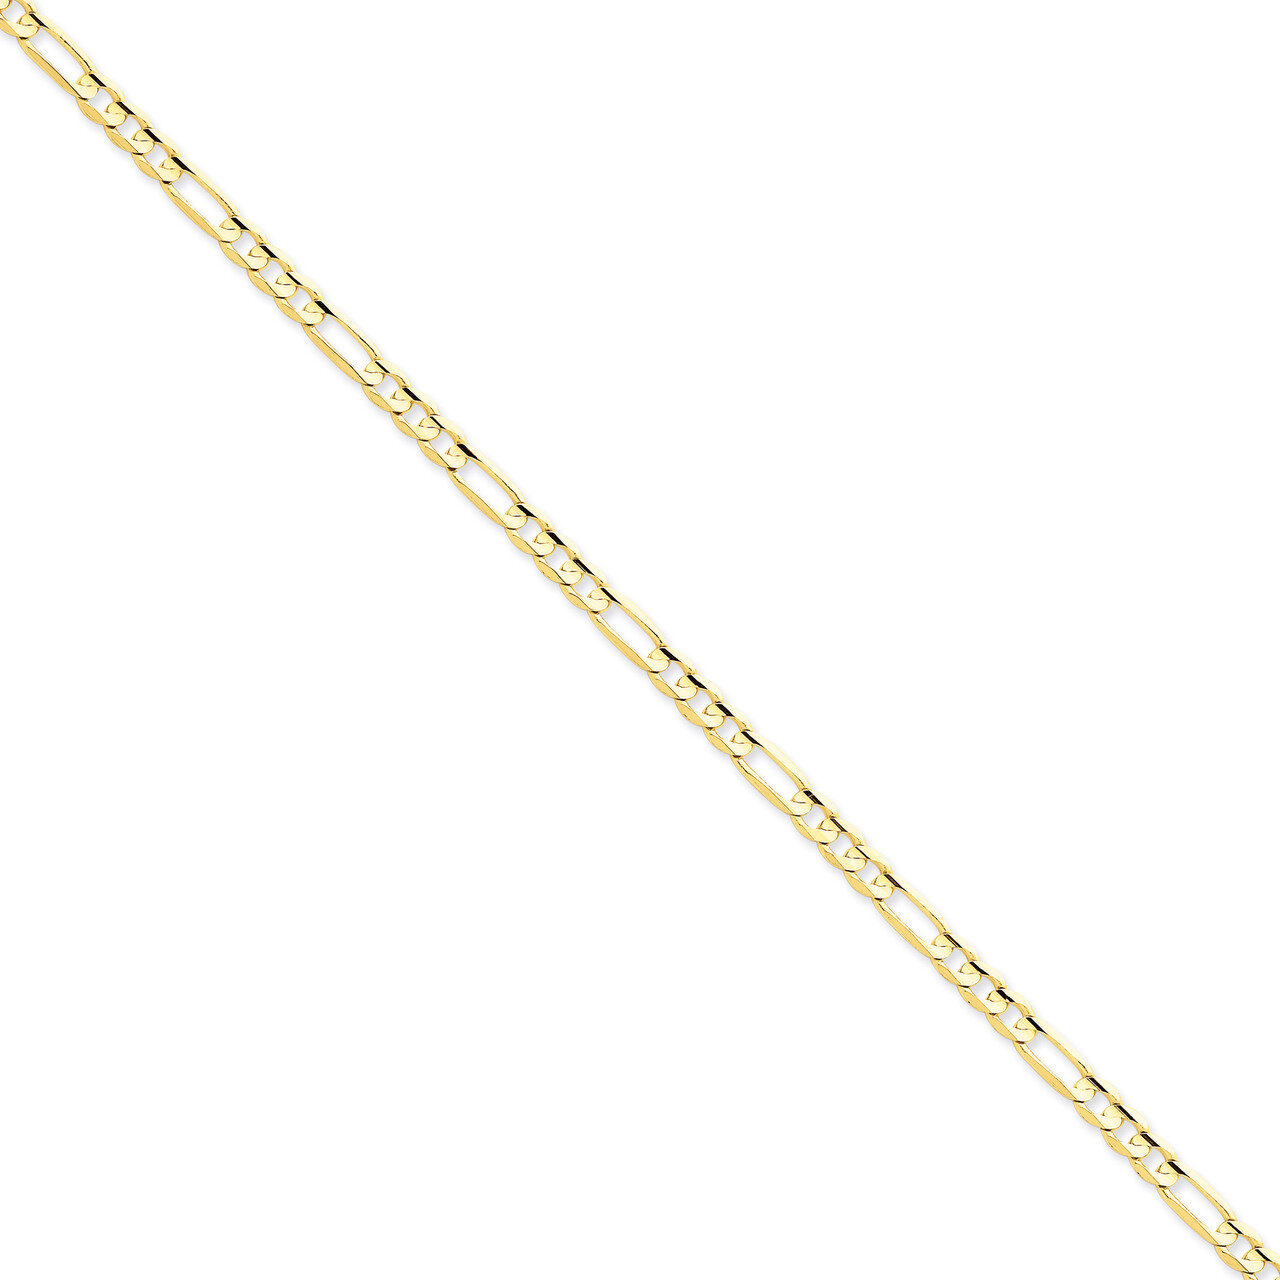 4.5mm Concave Open Figaro Chain 24 Inch 14k Gold LFG120-24